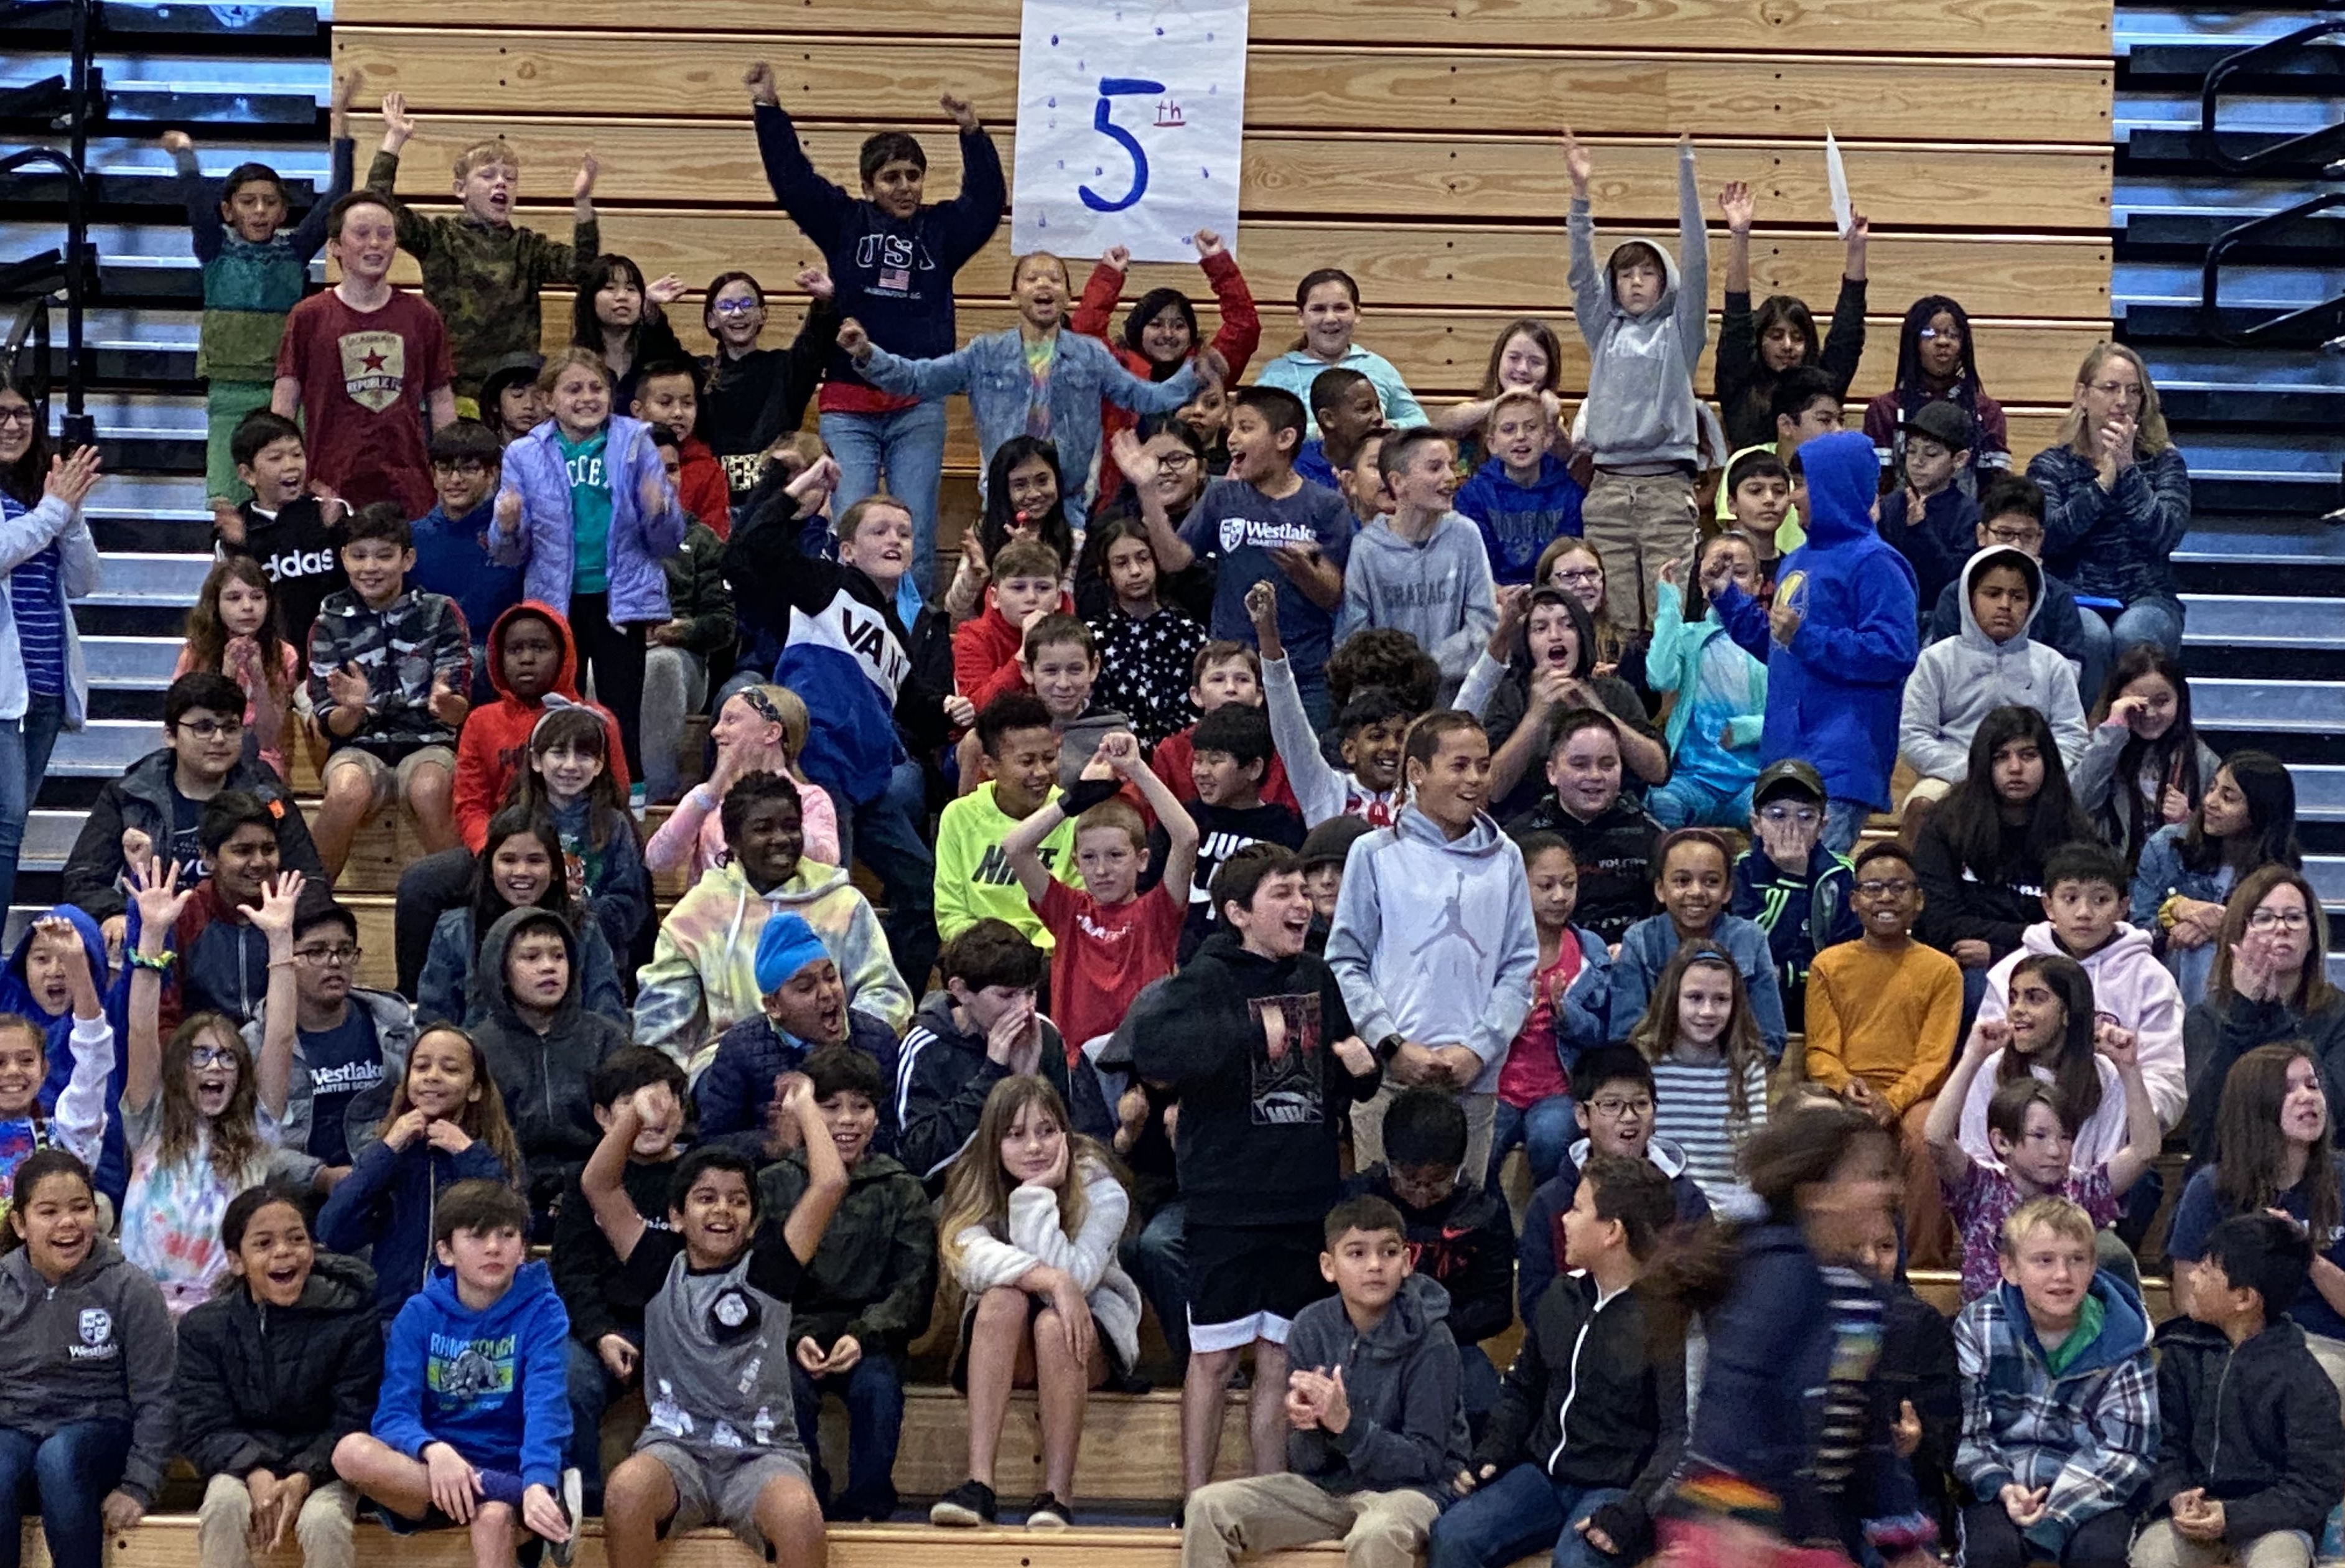 Our 6-8th grade leadership students put on an energetic rally for our 3rd to 5th grade students! Students competed in a caterpillar challenge, an obstacle course, and dodgeball!